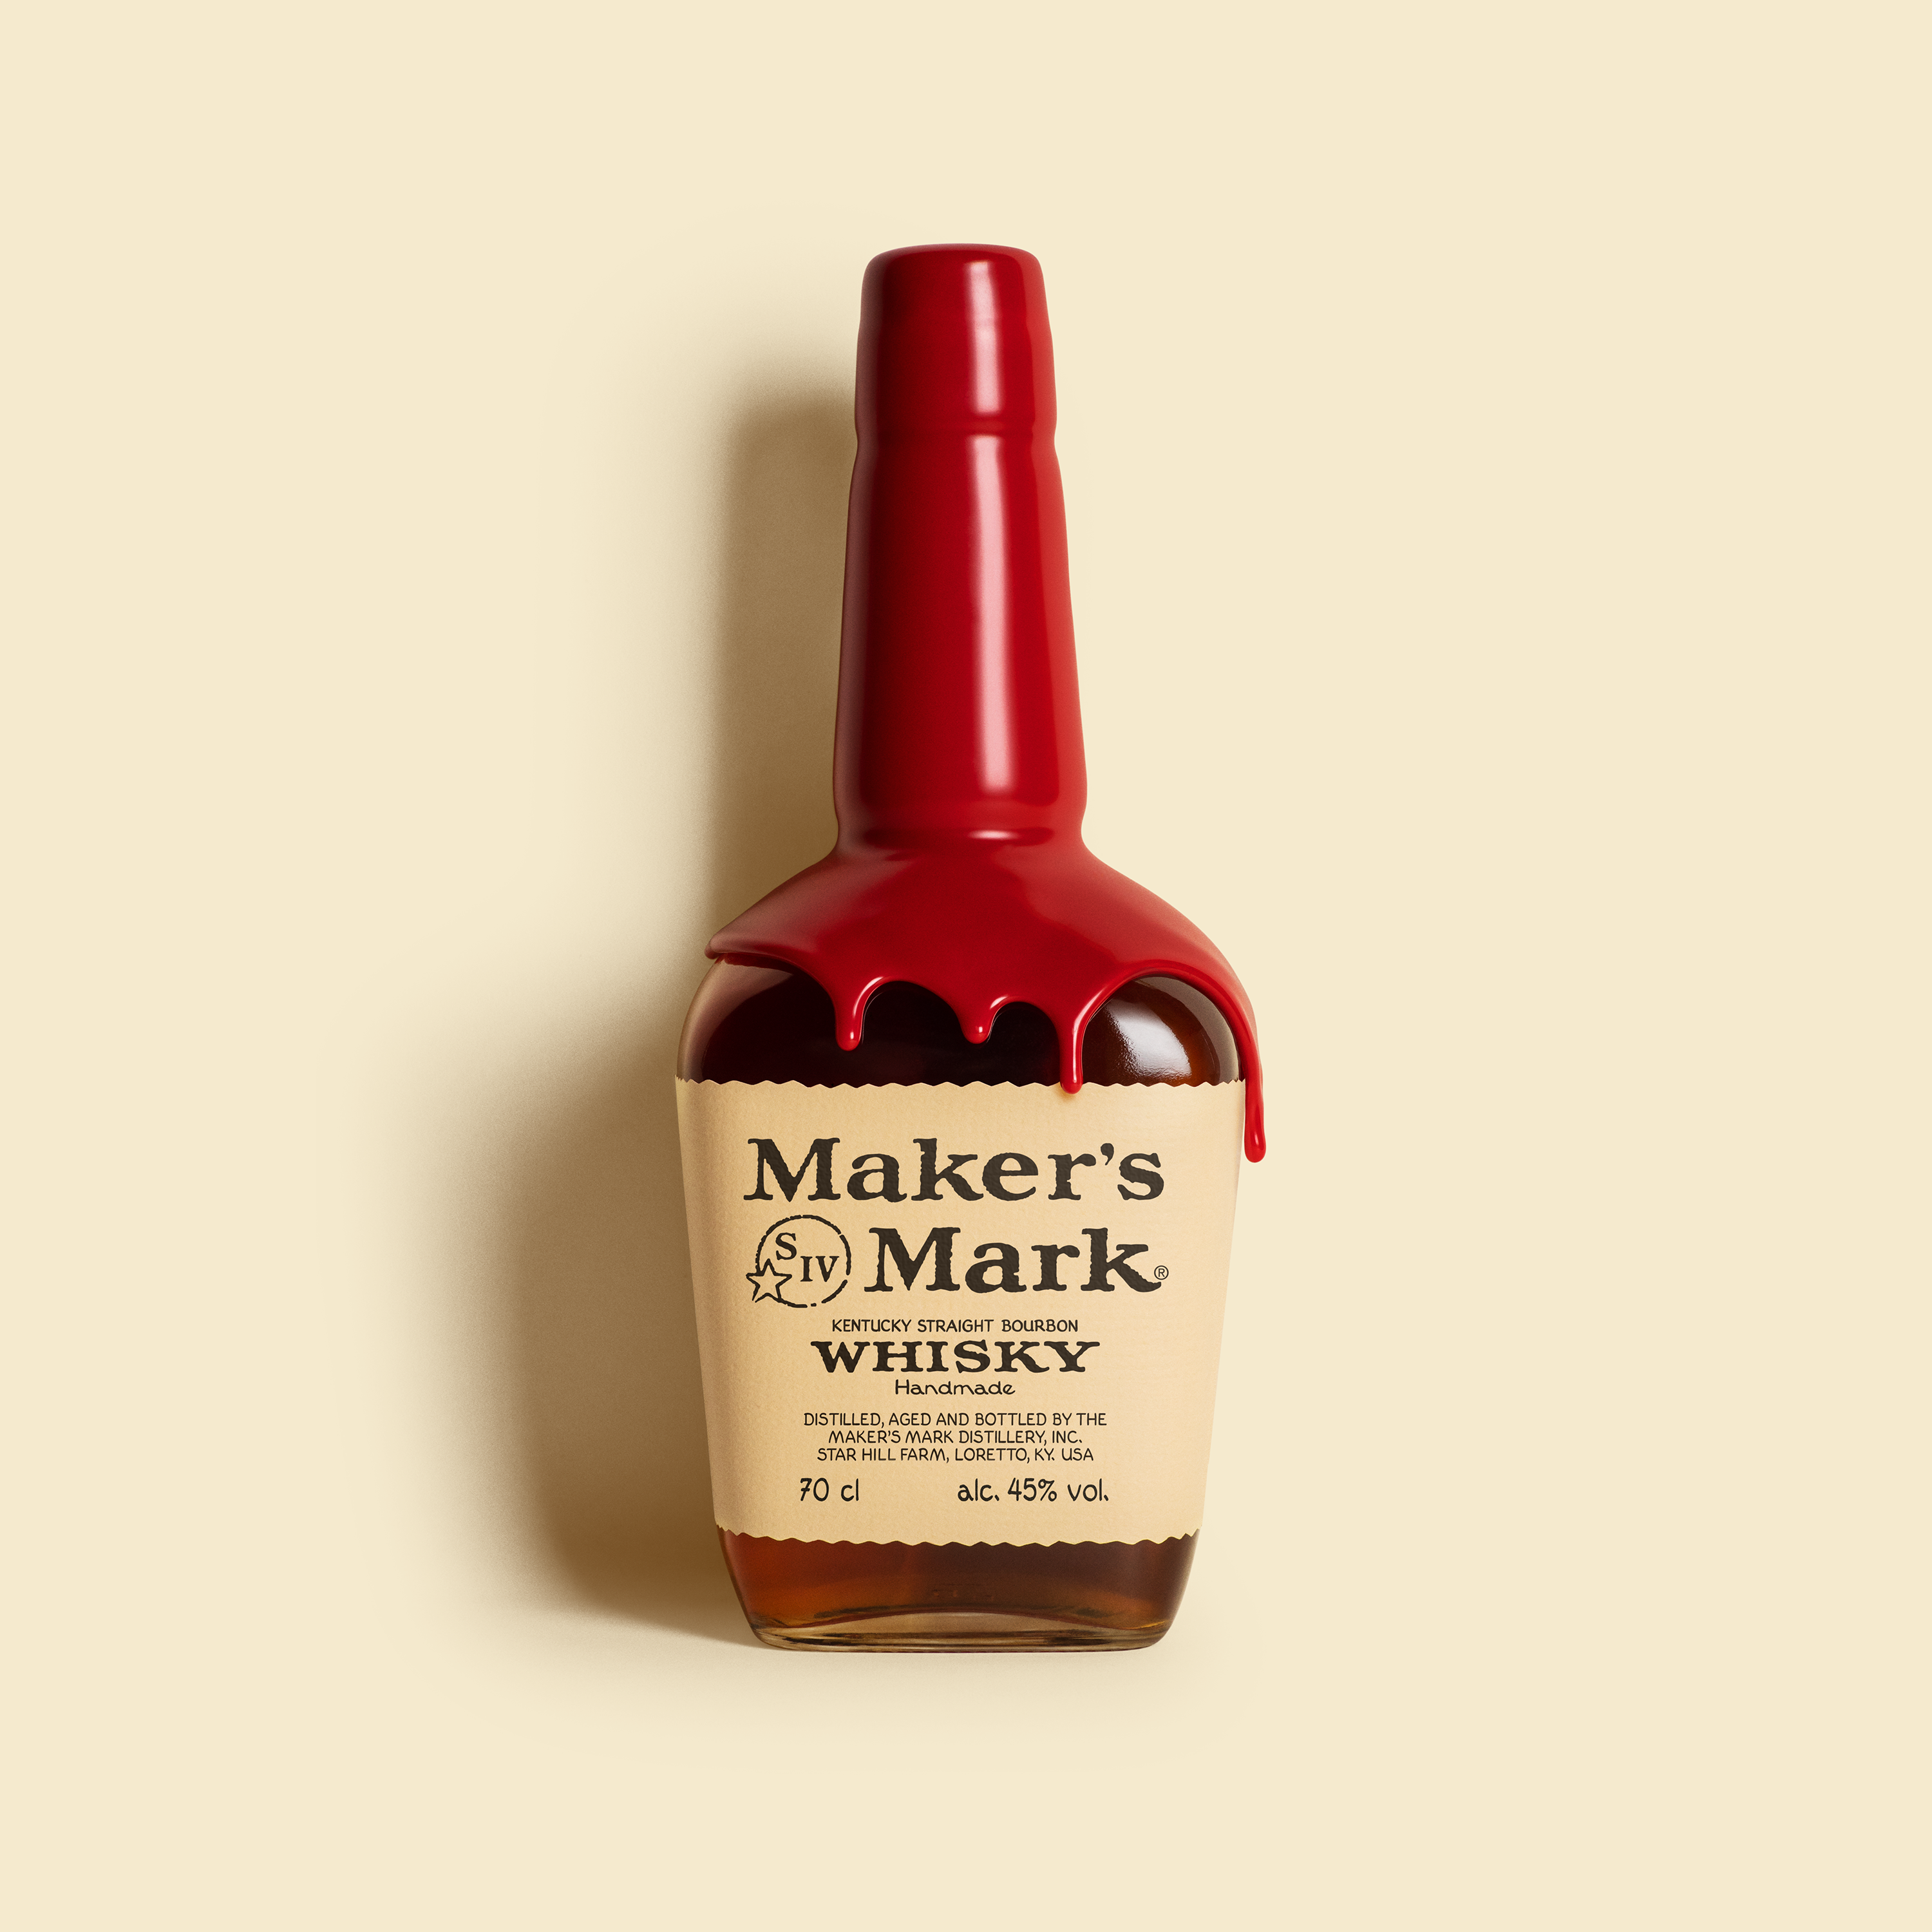 Mystery Nights Presents: Maker's Mark @ The Great Hall Restaurant & Lounge, 24 March